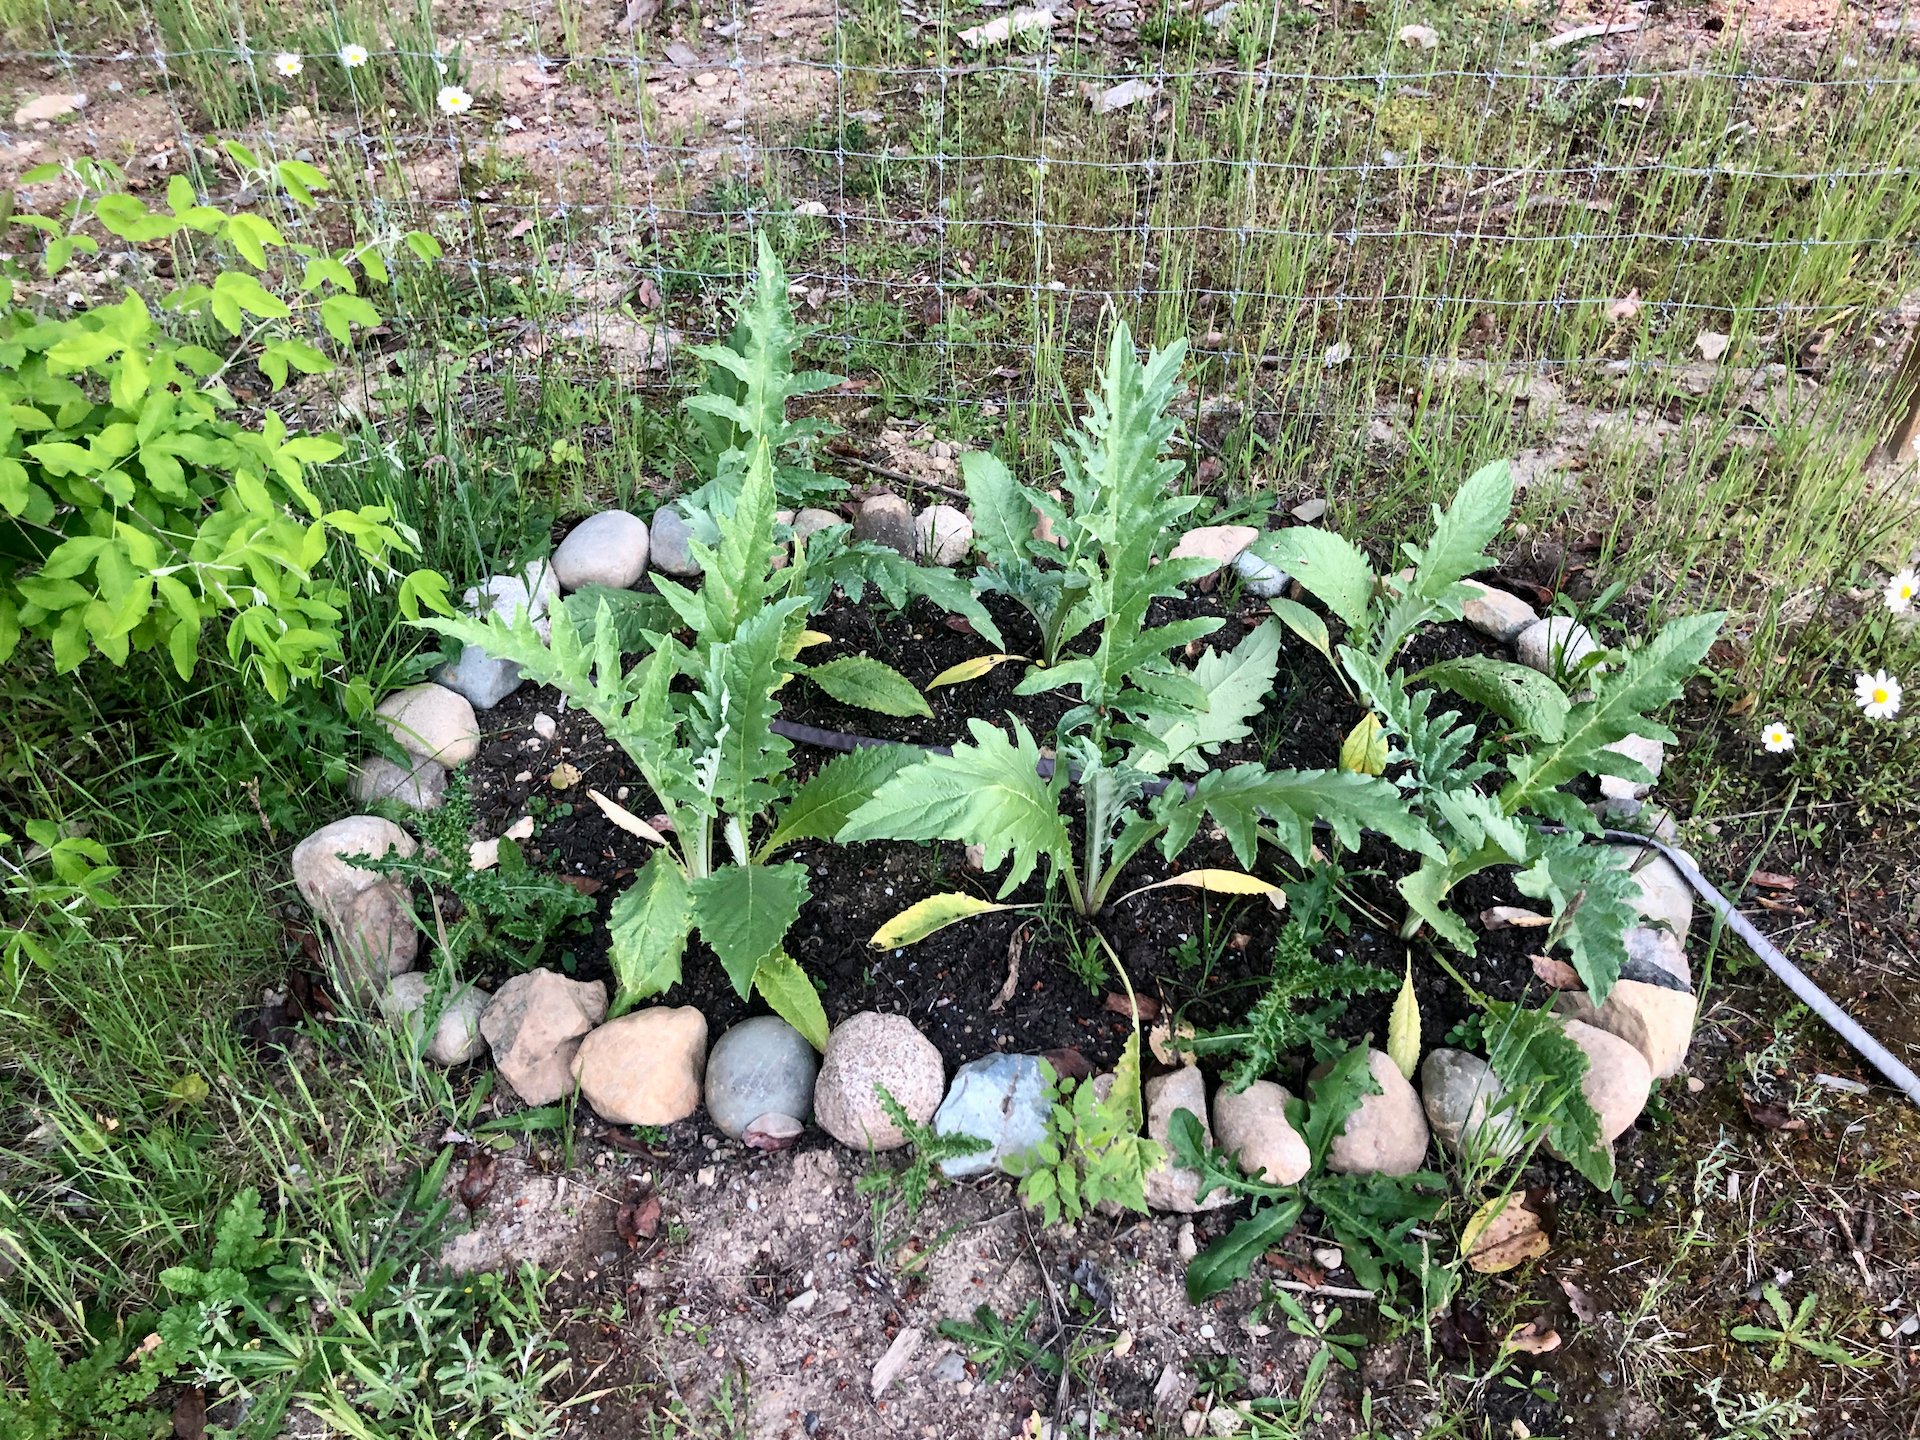  The artichokes are growing well. 